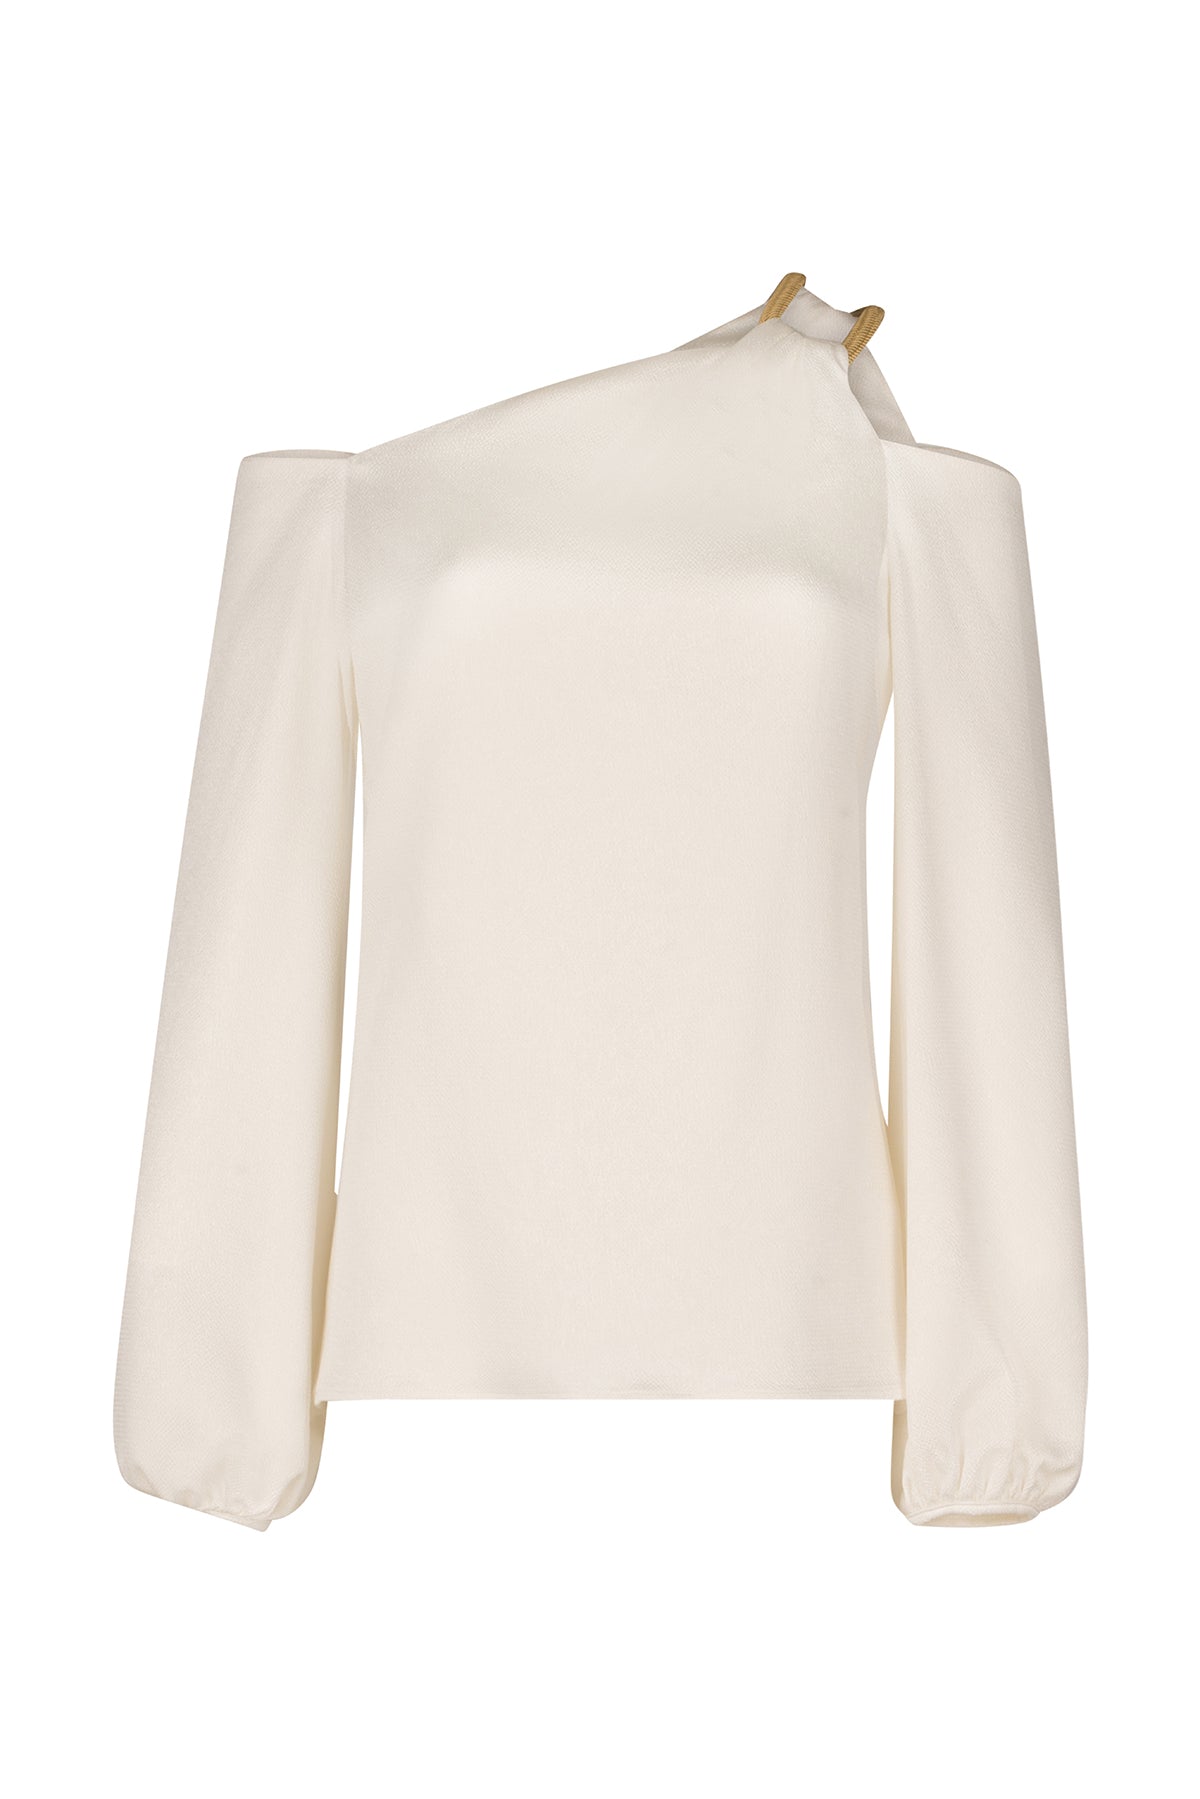 A Barbie Blouse White with gold metallic detailing on the sleeve.